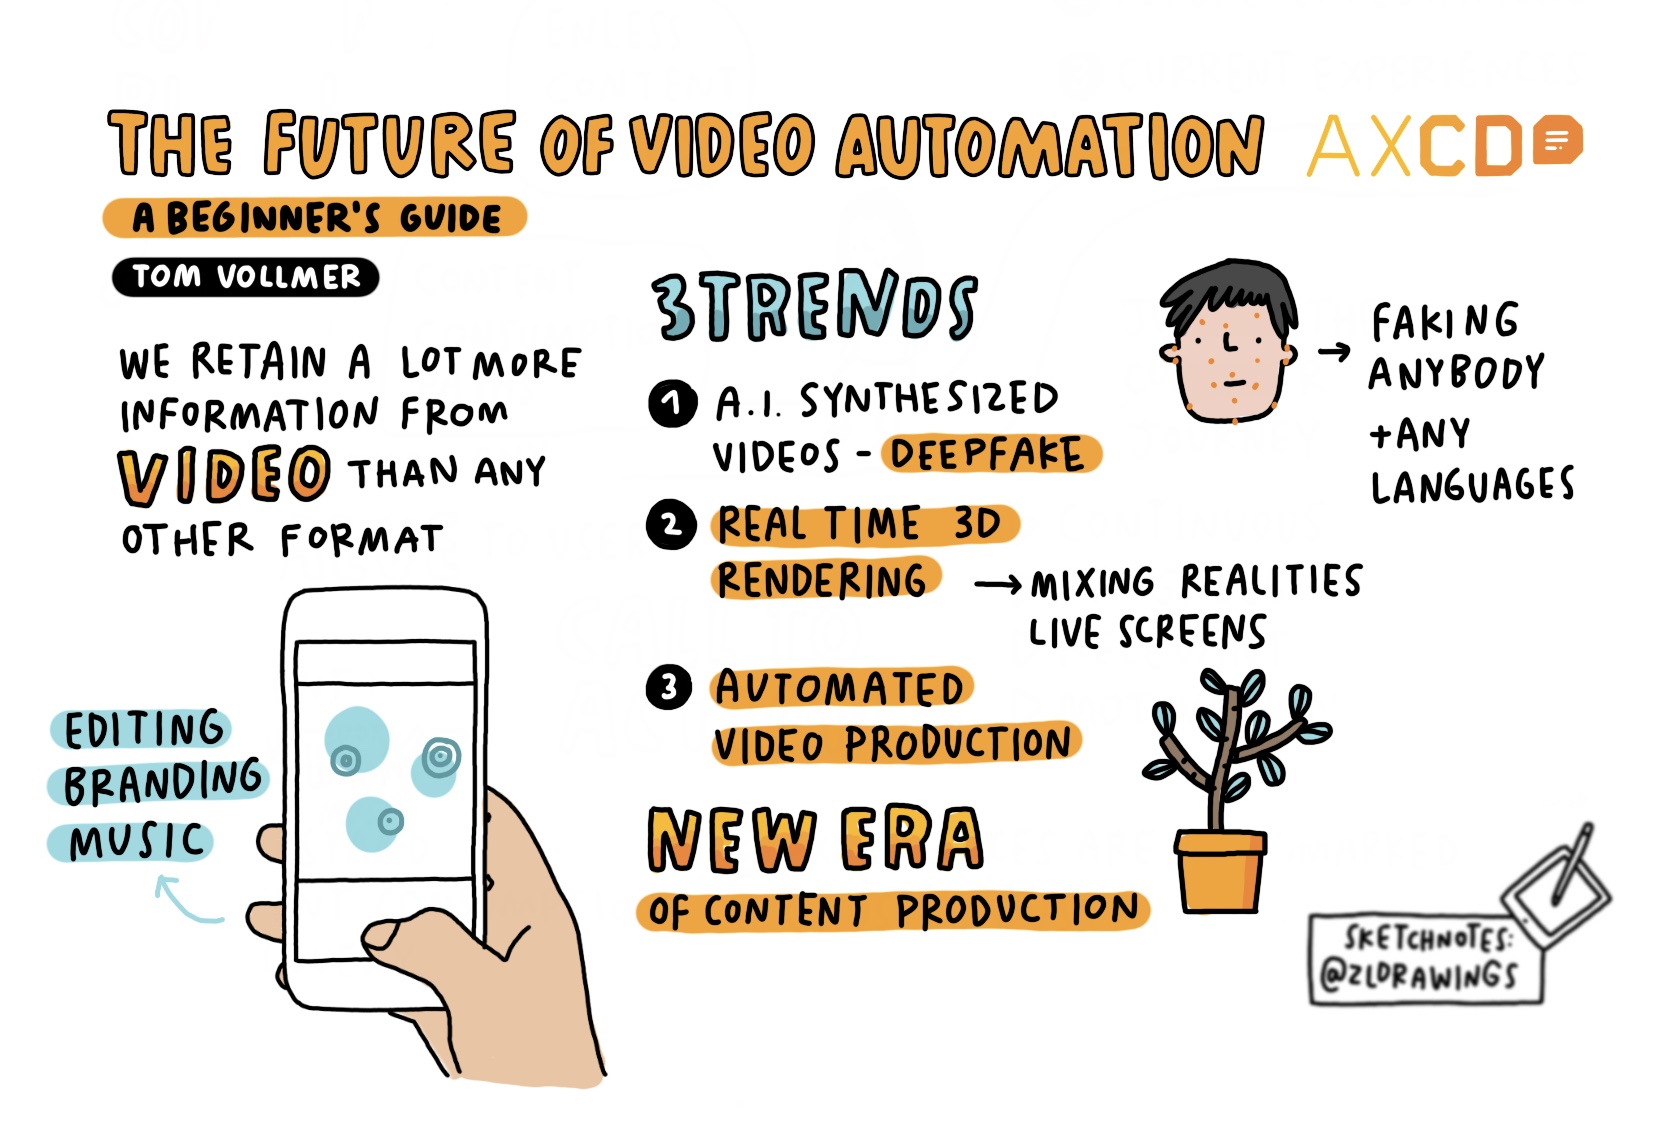 Sketchnote of AXCD Talk: the future of video automation - a beginners guide